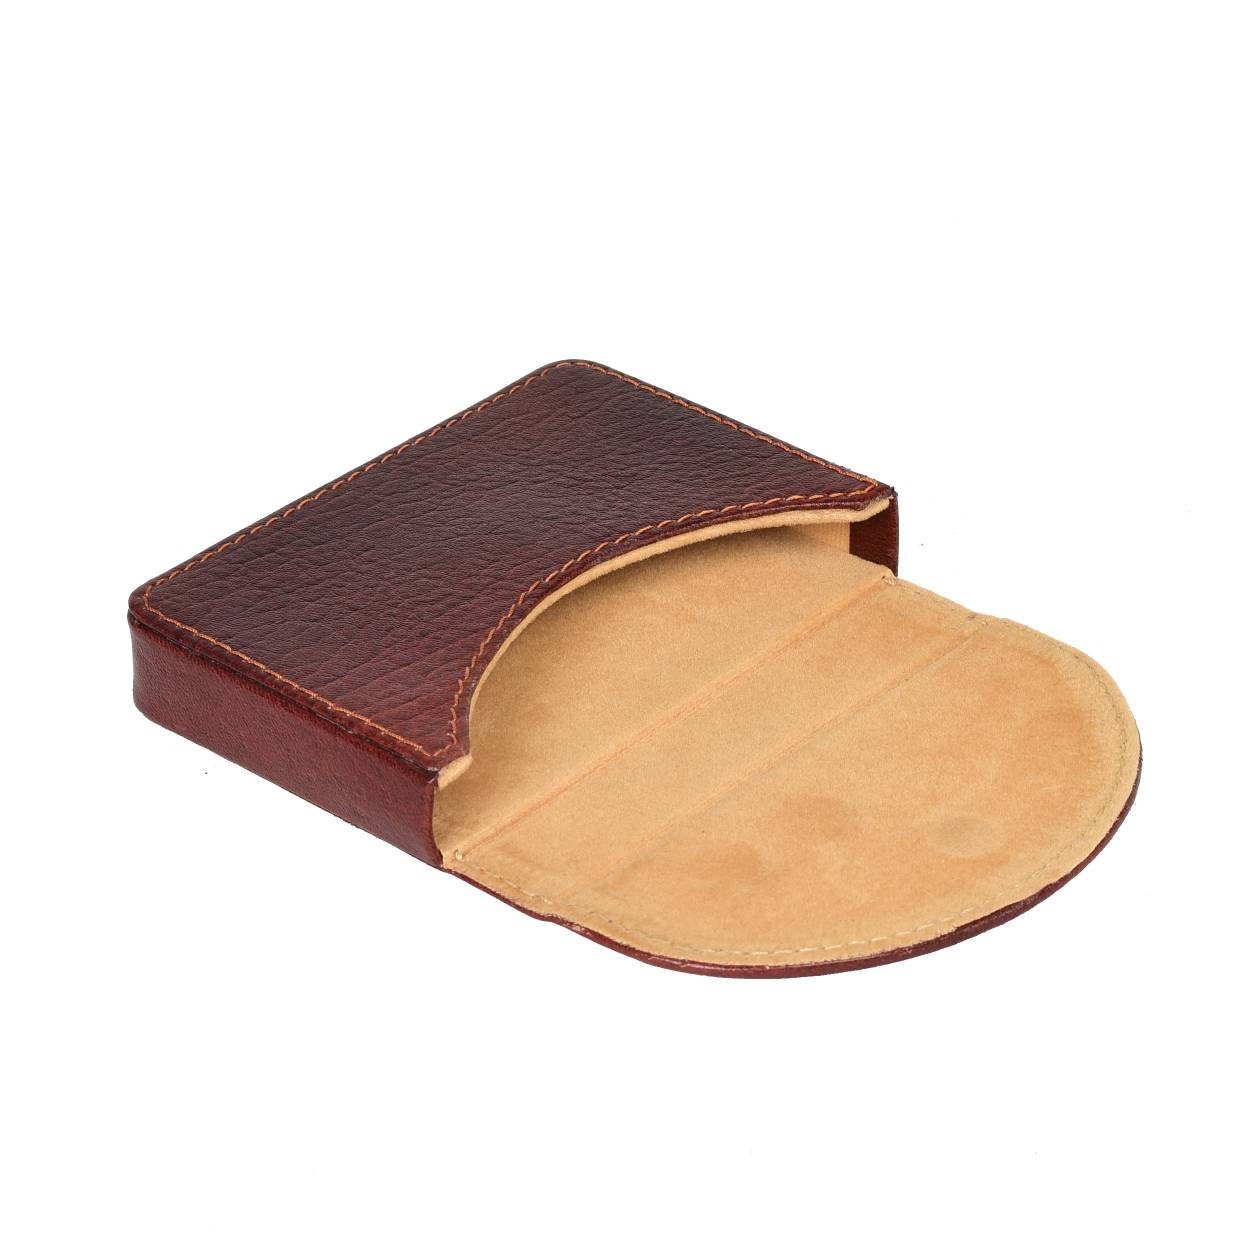 LINDSEY STREET Genuine Leather Credit Card Holder Card Organizer Brown Leather Card Case Business Card Cases